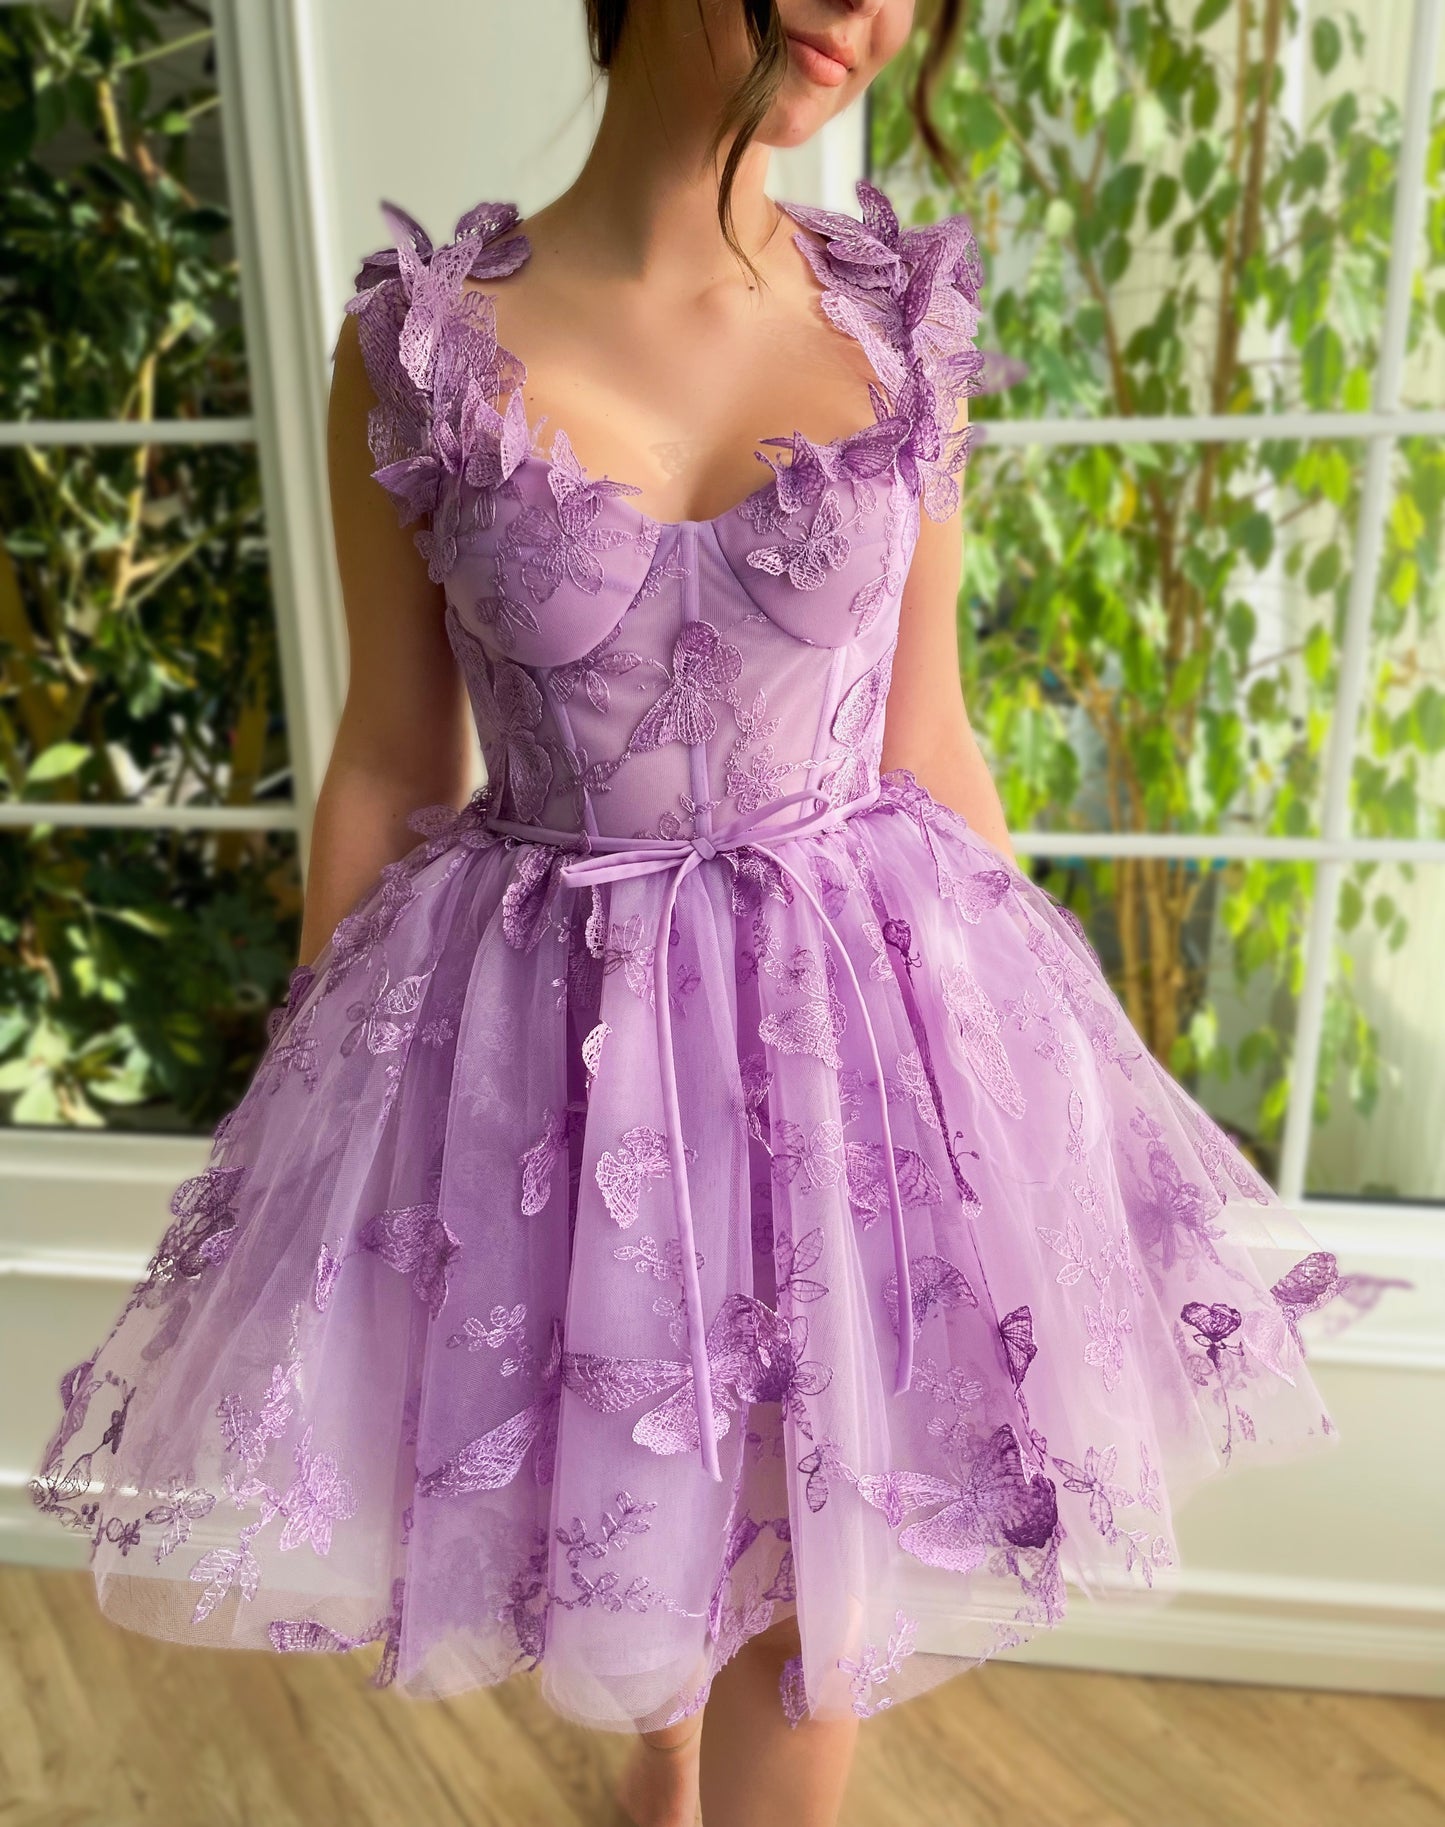 Purple mini dress with straps and embroidered butterflies